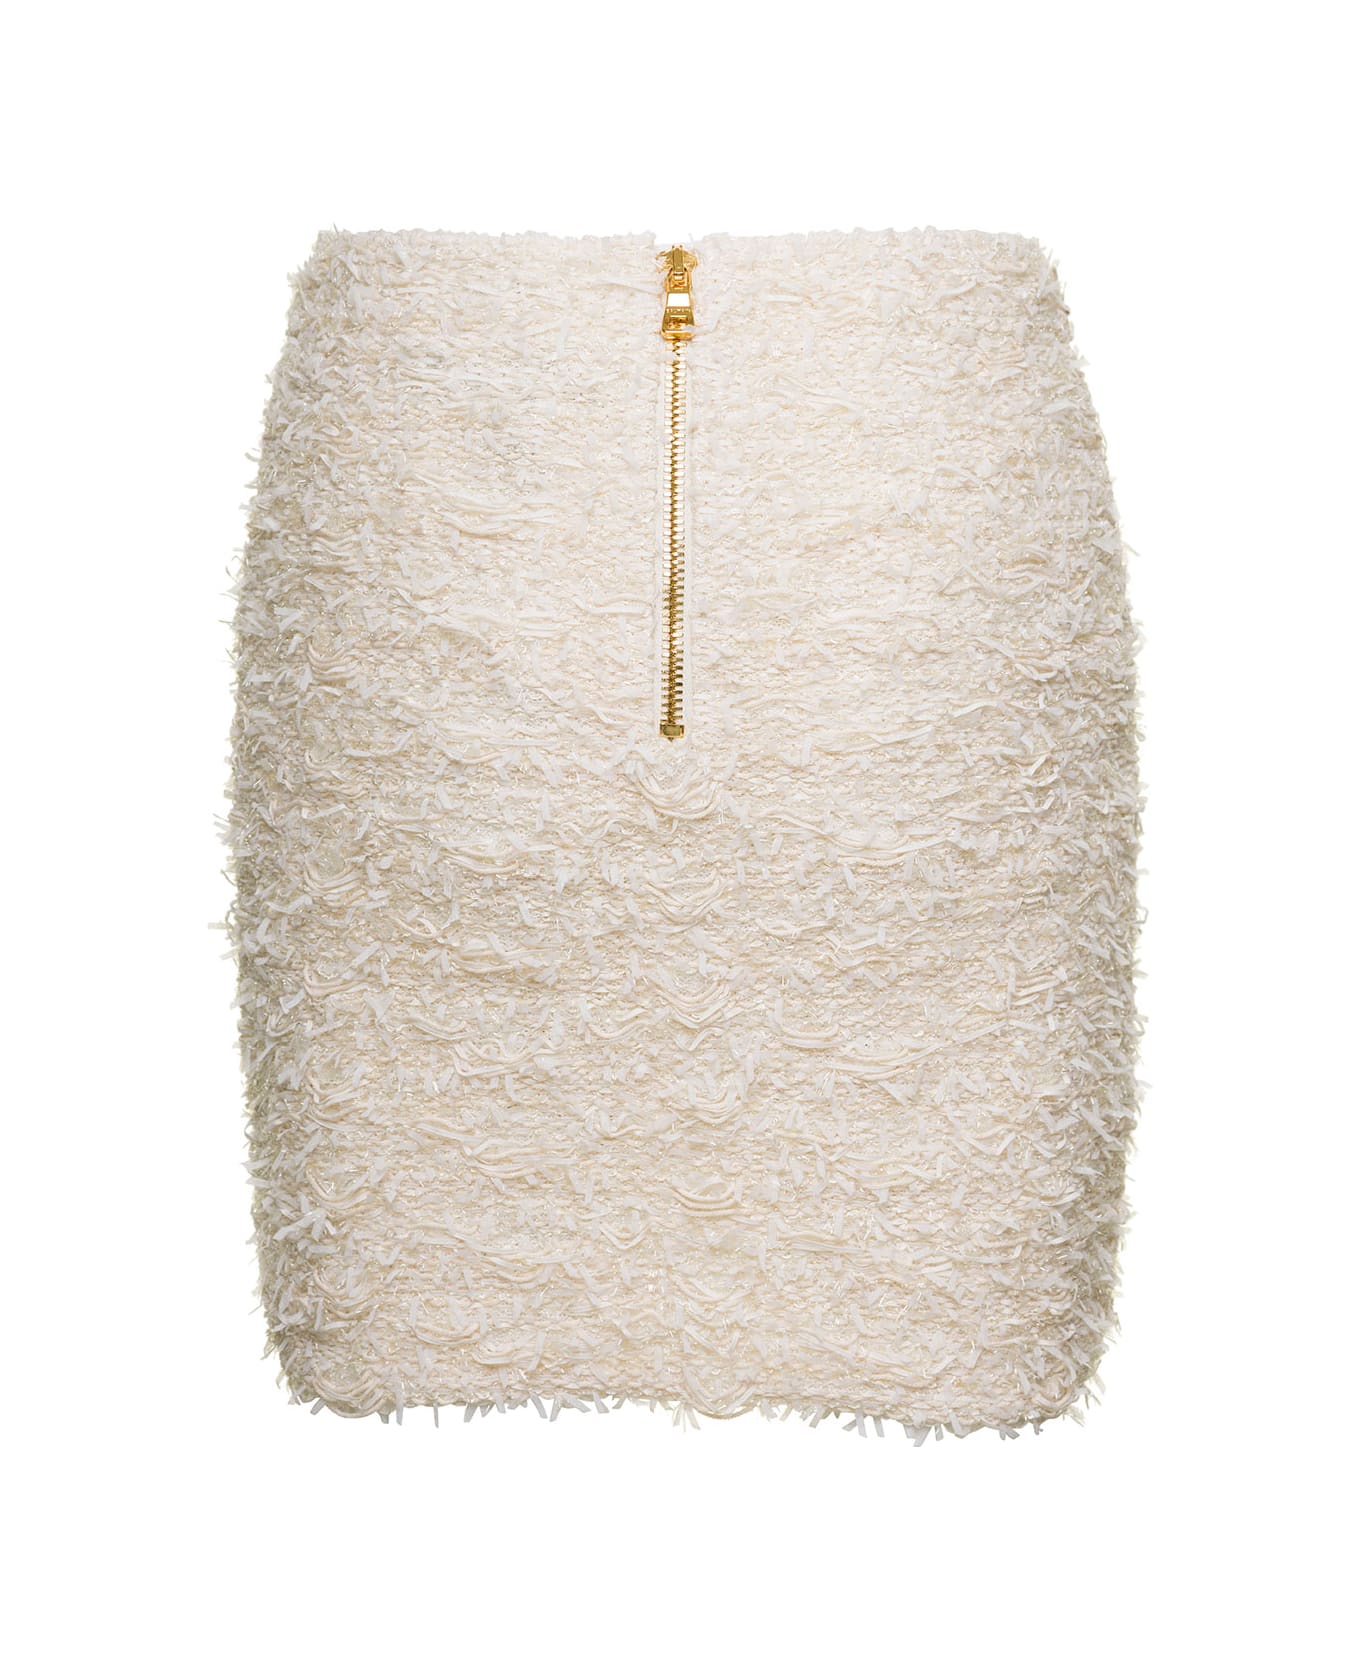 Balmain White Tweed High-waisted Miniskirt With Pockets In Cotton Blend Woman - White